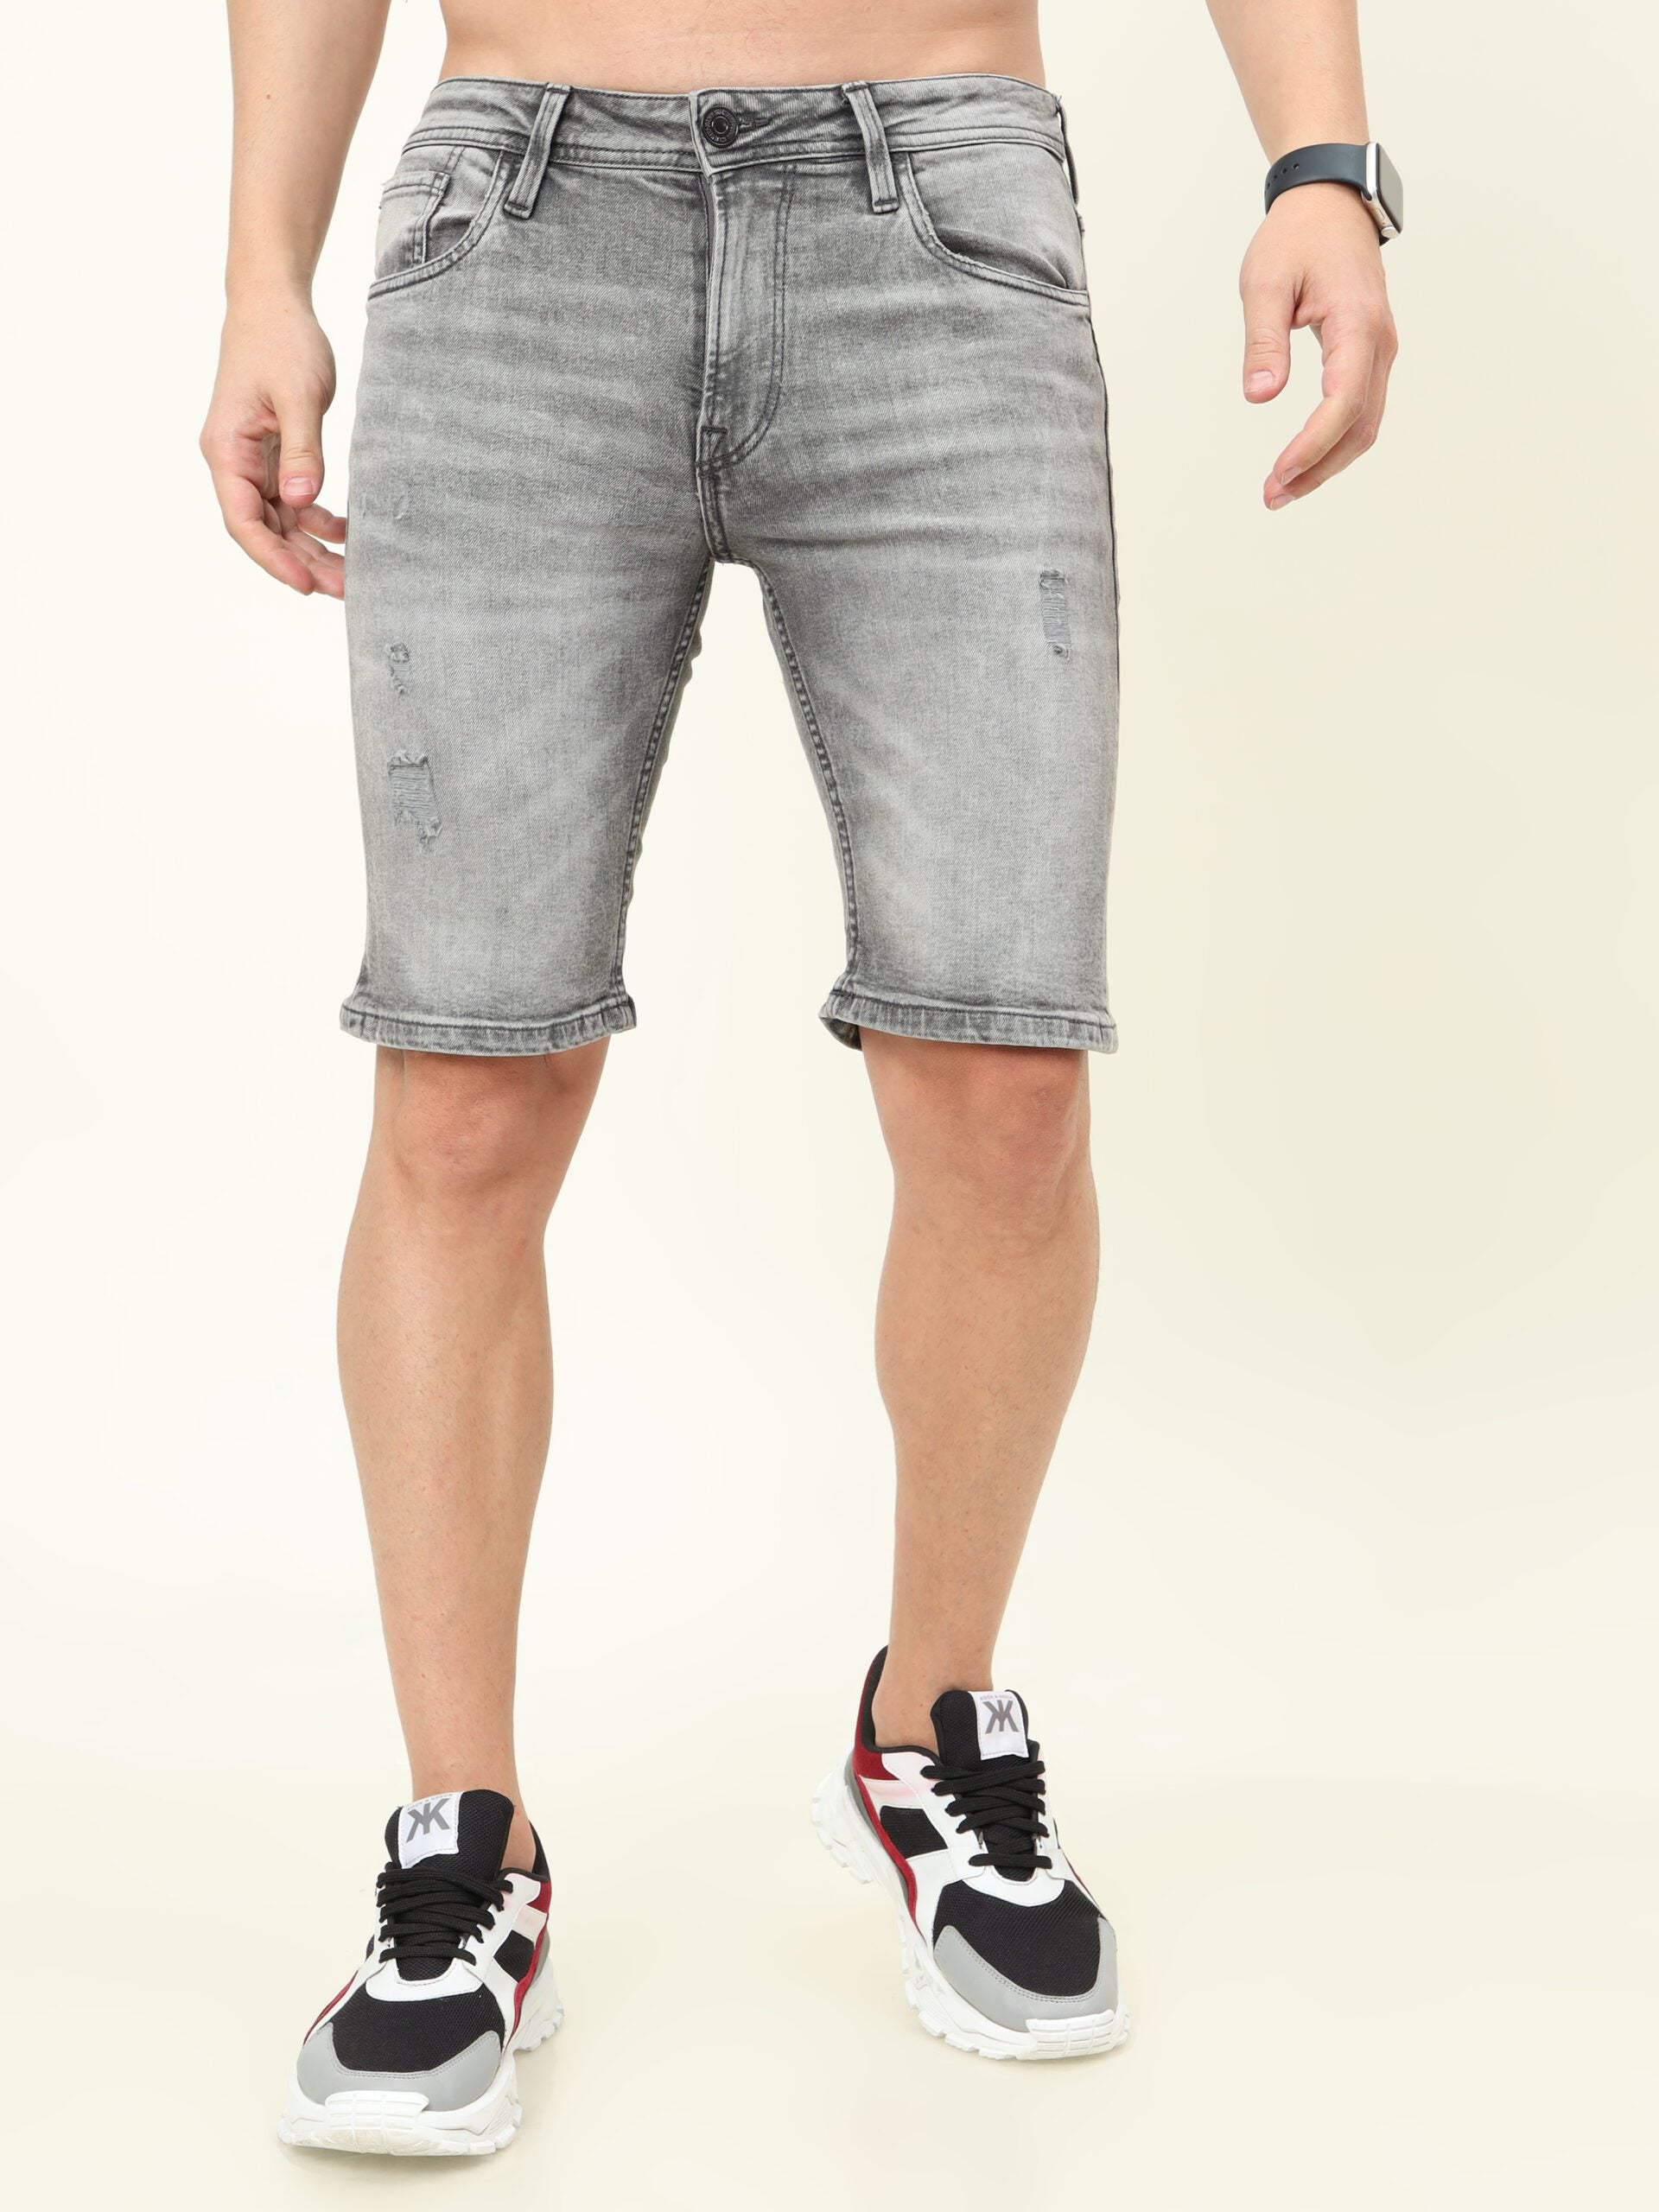 Men's shorts | Free home delivery + free returns | GARCIA